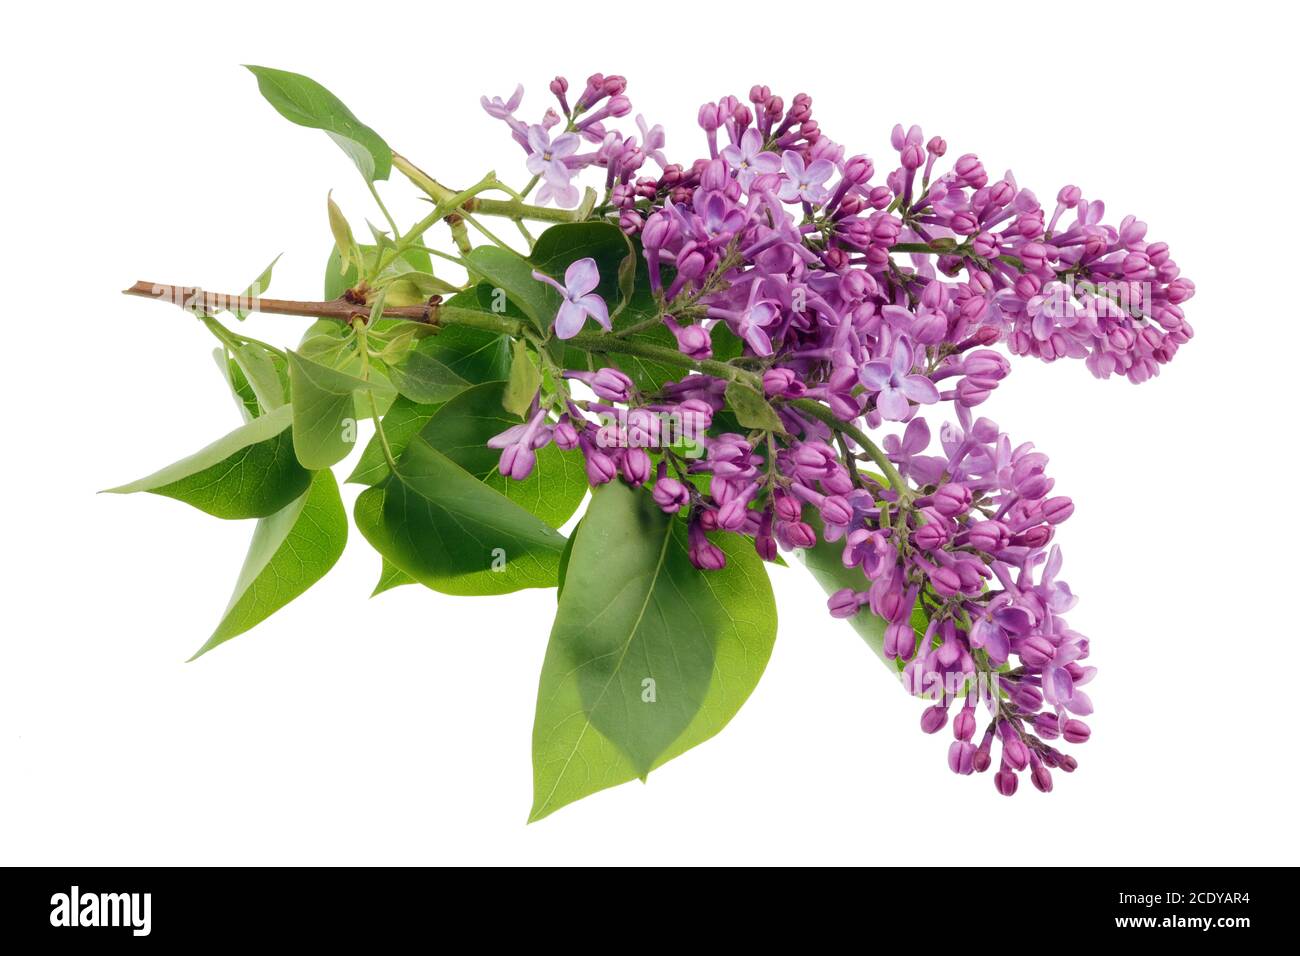 Flowers of light purple real lilac on small branches with leaves isolated Stock Photo